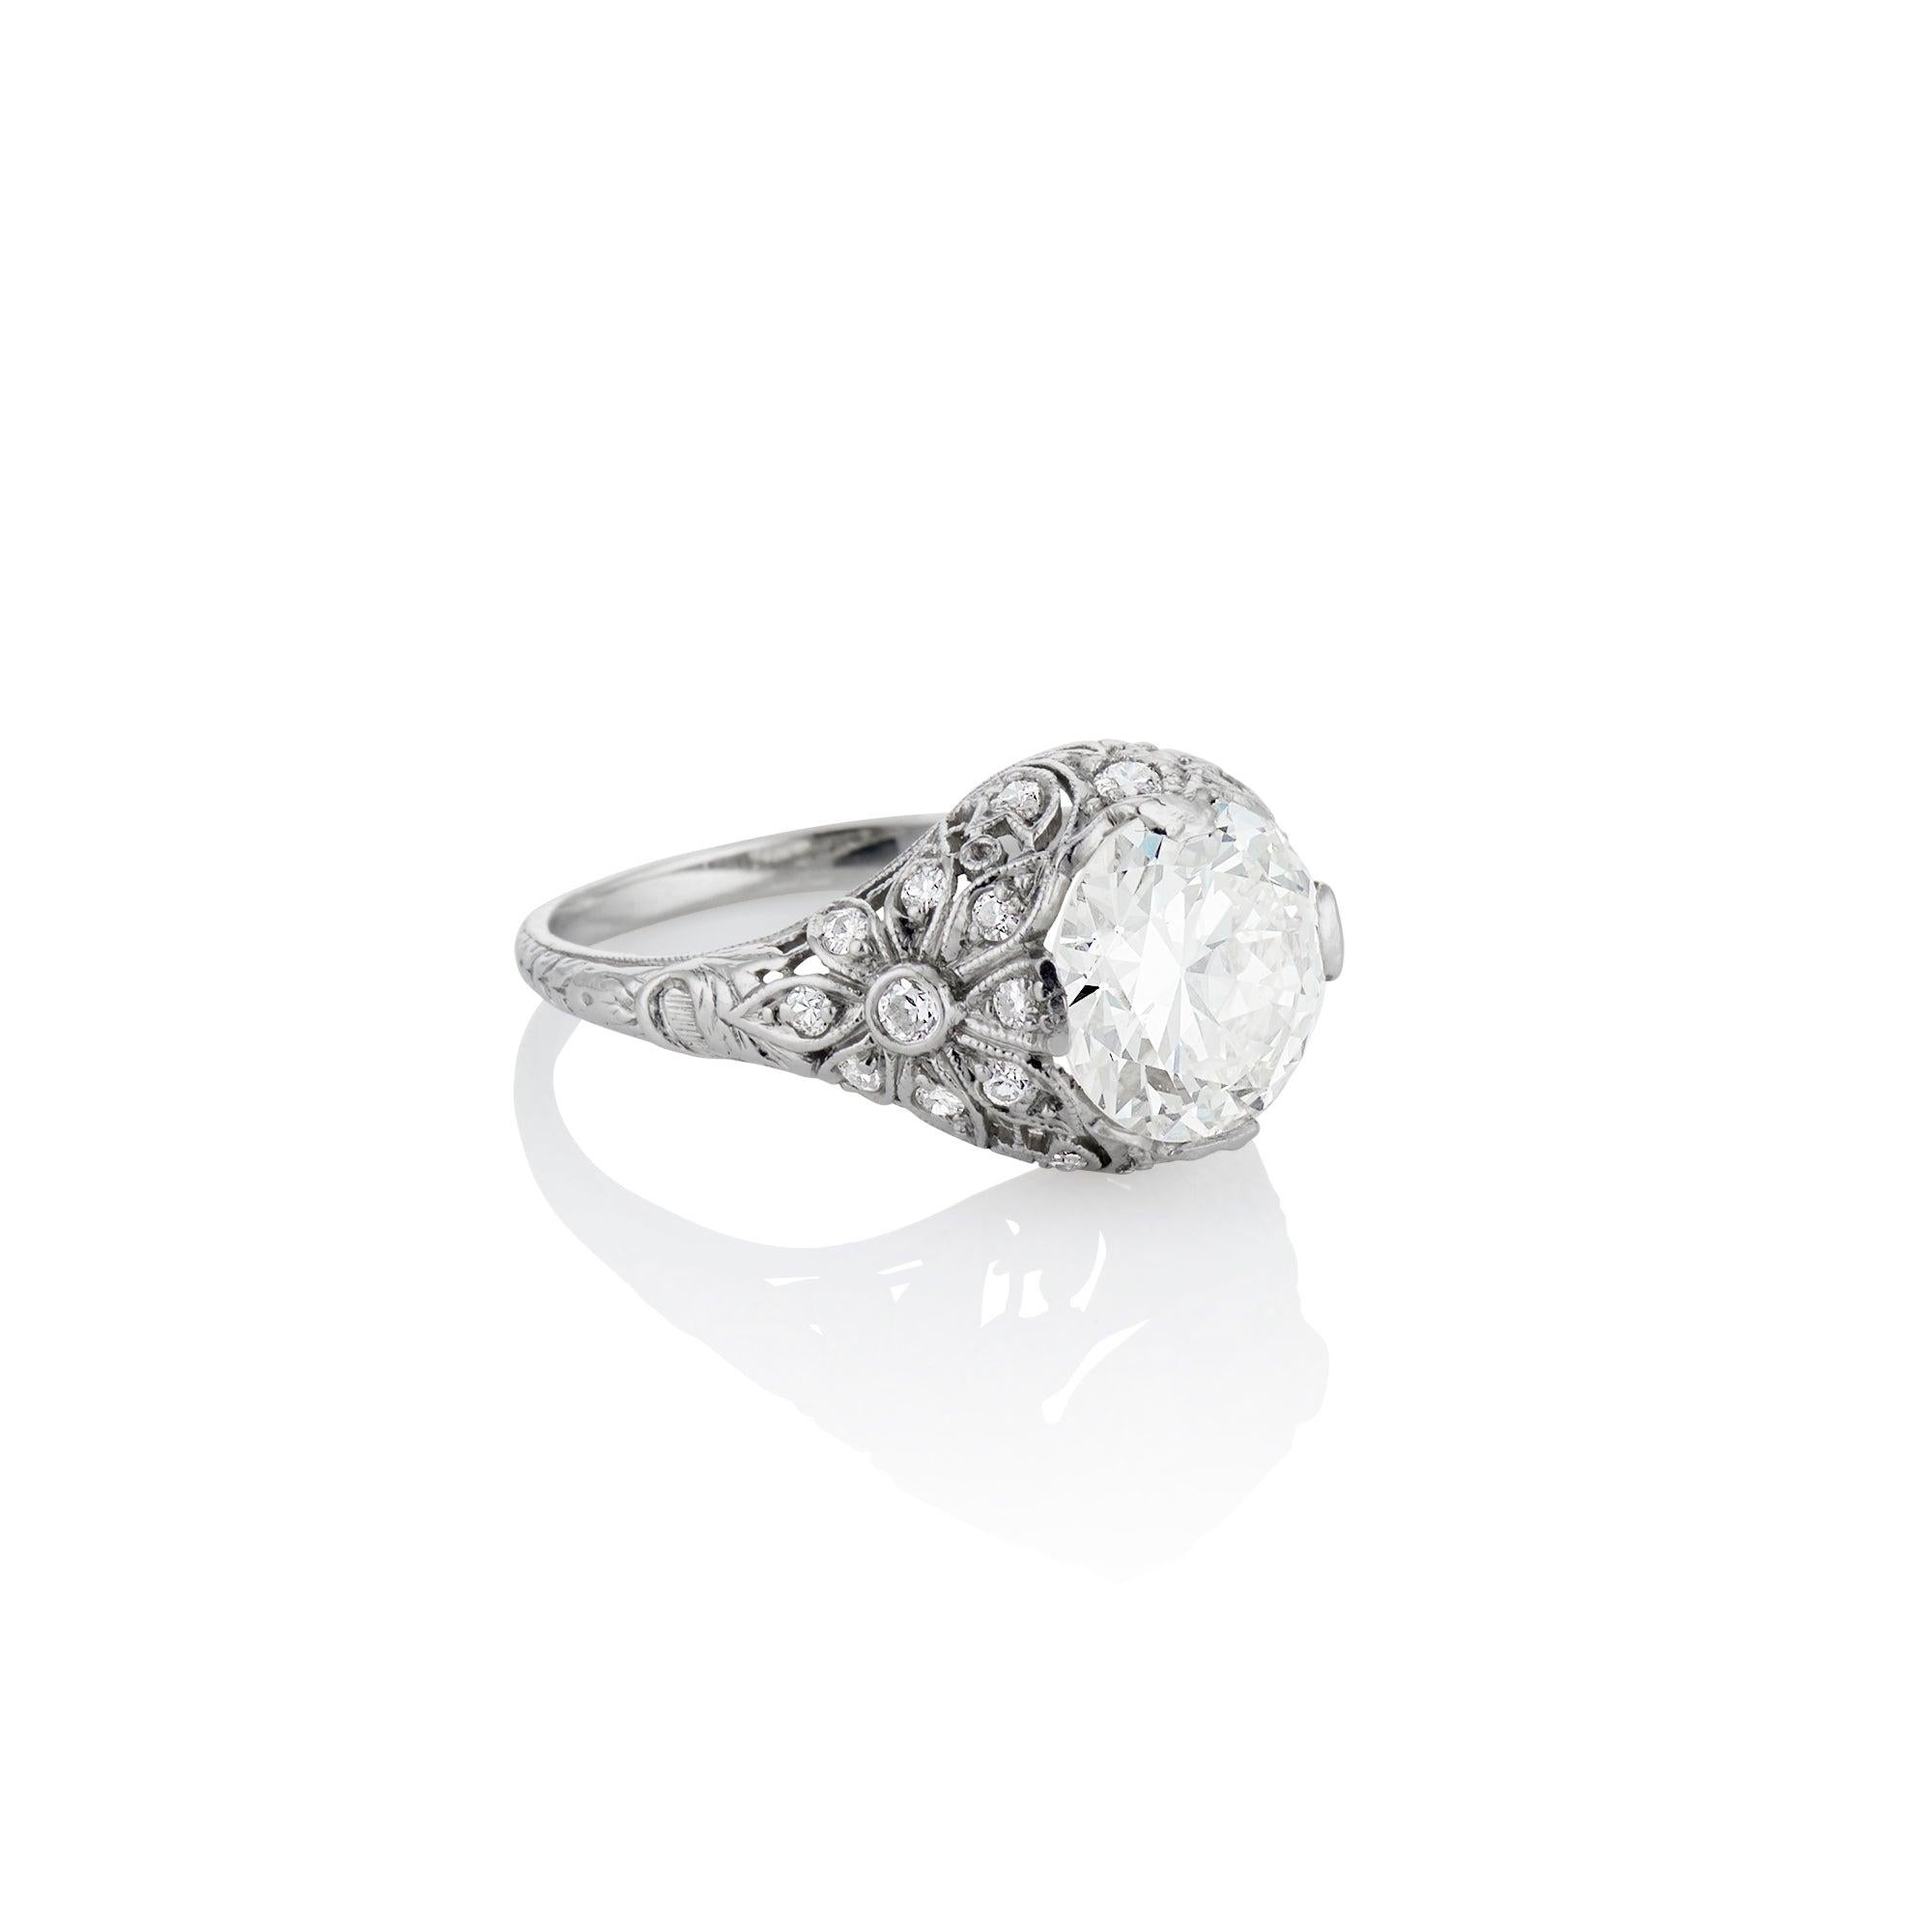 Edwardian 2.82 Carat Diamond Ring, VVS2 GIA In Good Condition For Sale In Hummelstown, PA